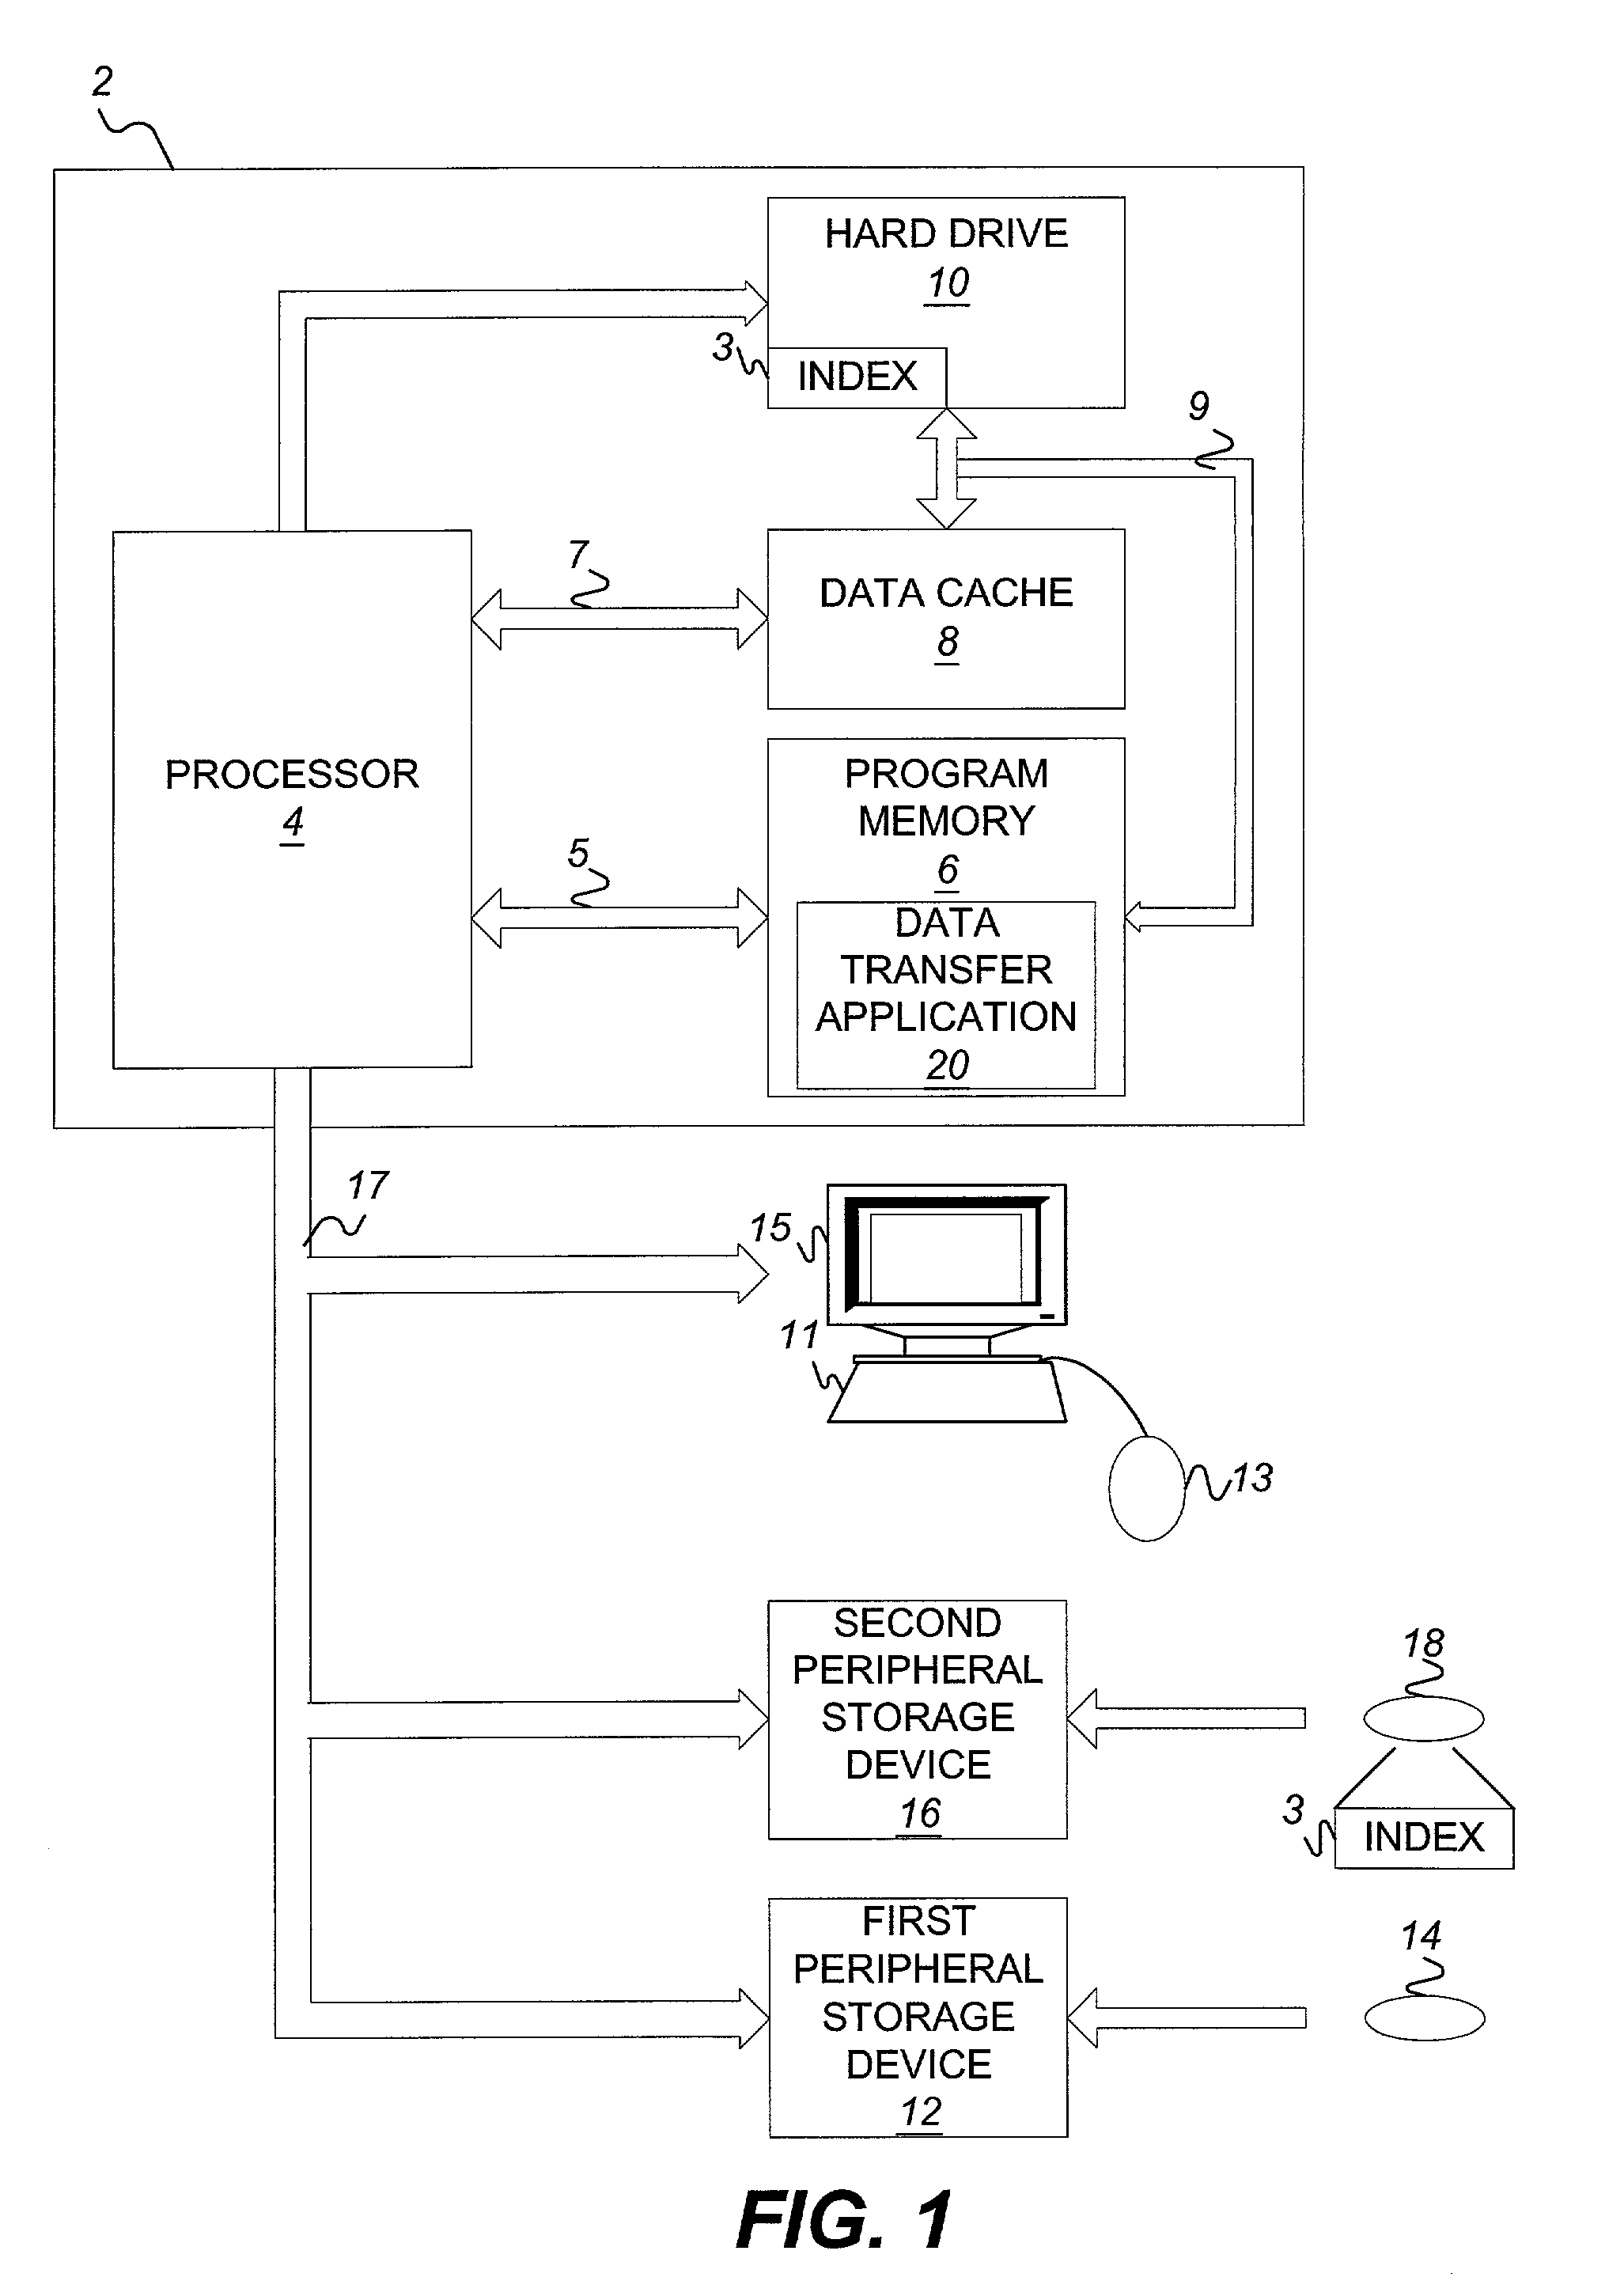 Method for transferring and indexing data from old media to new media